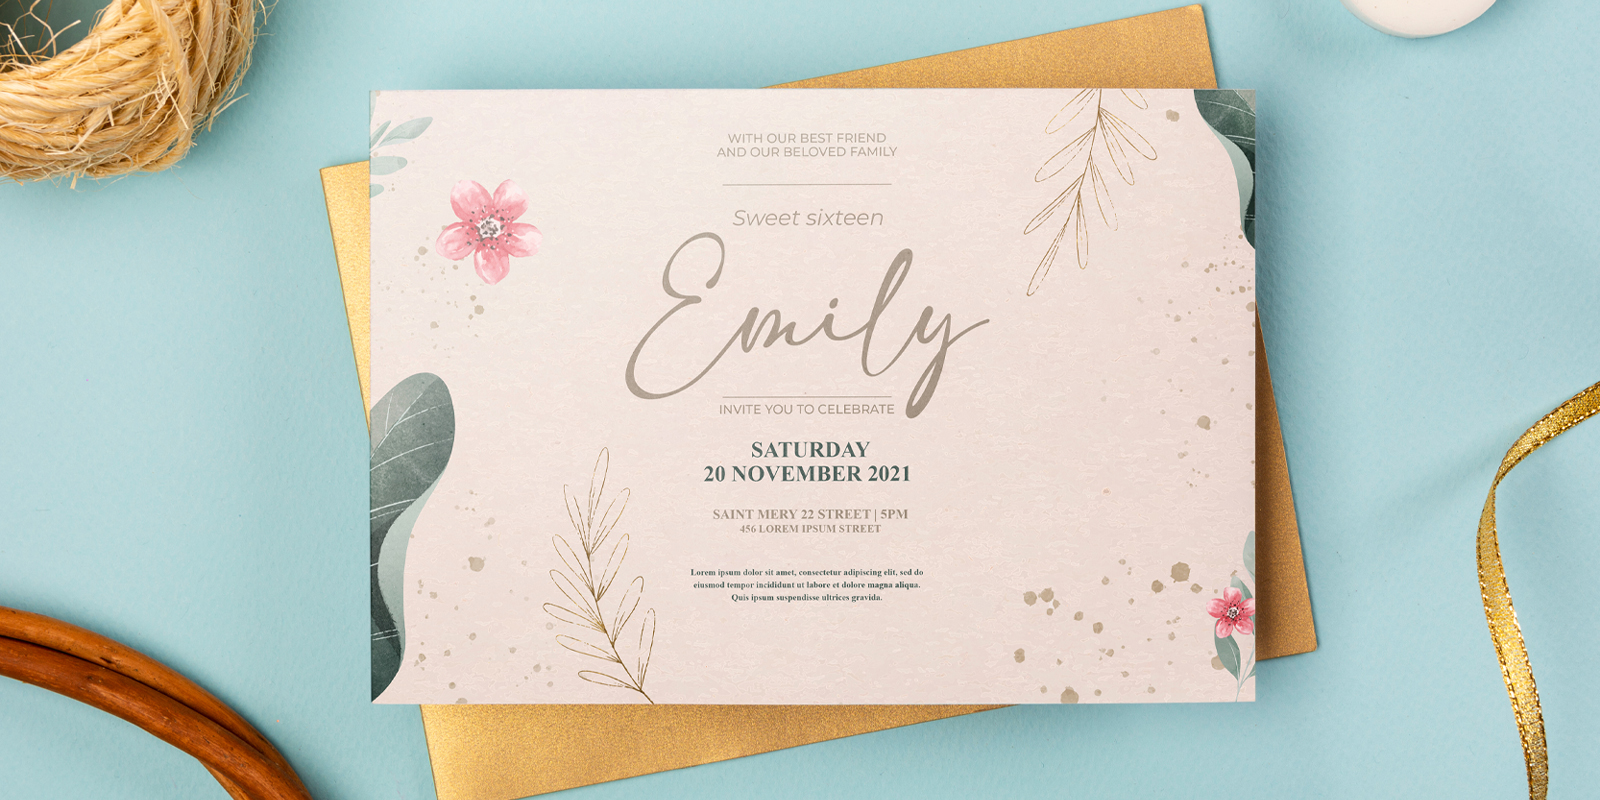 Invitations in Vilnius - Print with Pagerr